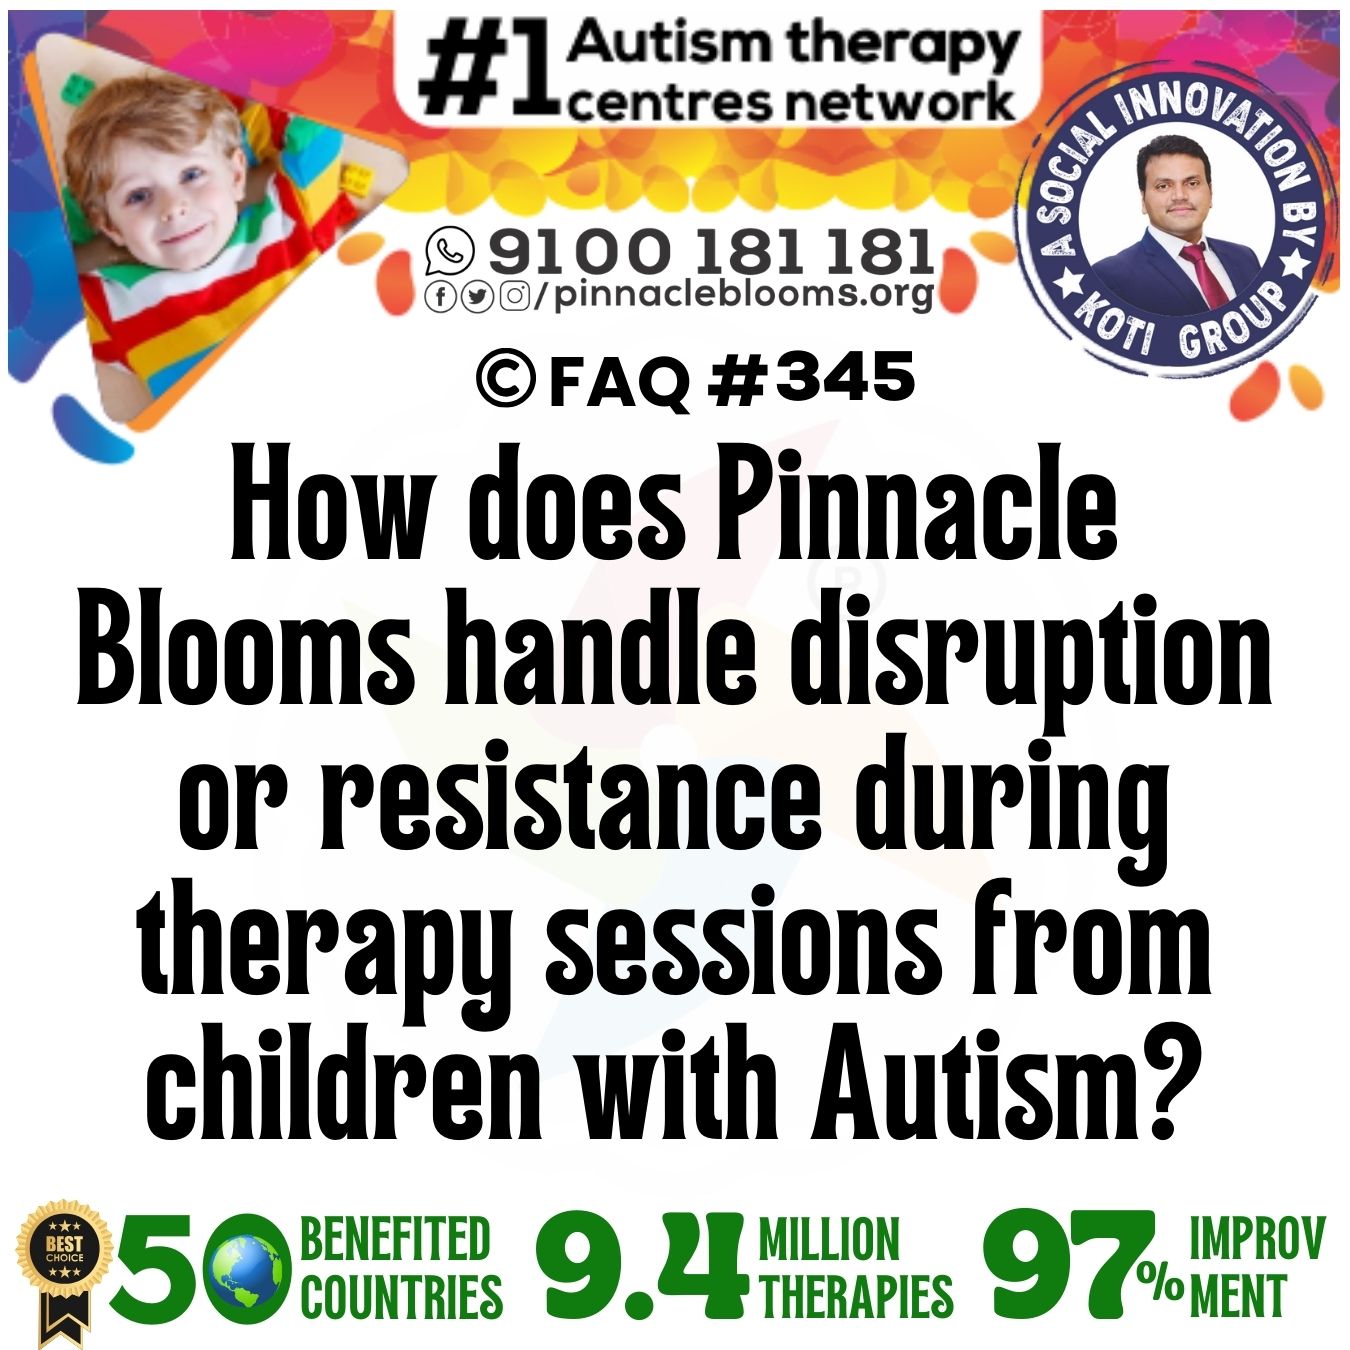 How does Pinnacle Blooms handle disruption or resistance during therapy sessions from children with Autism?